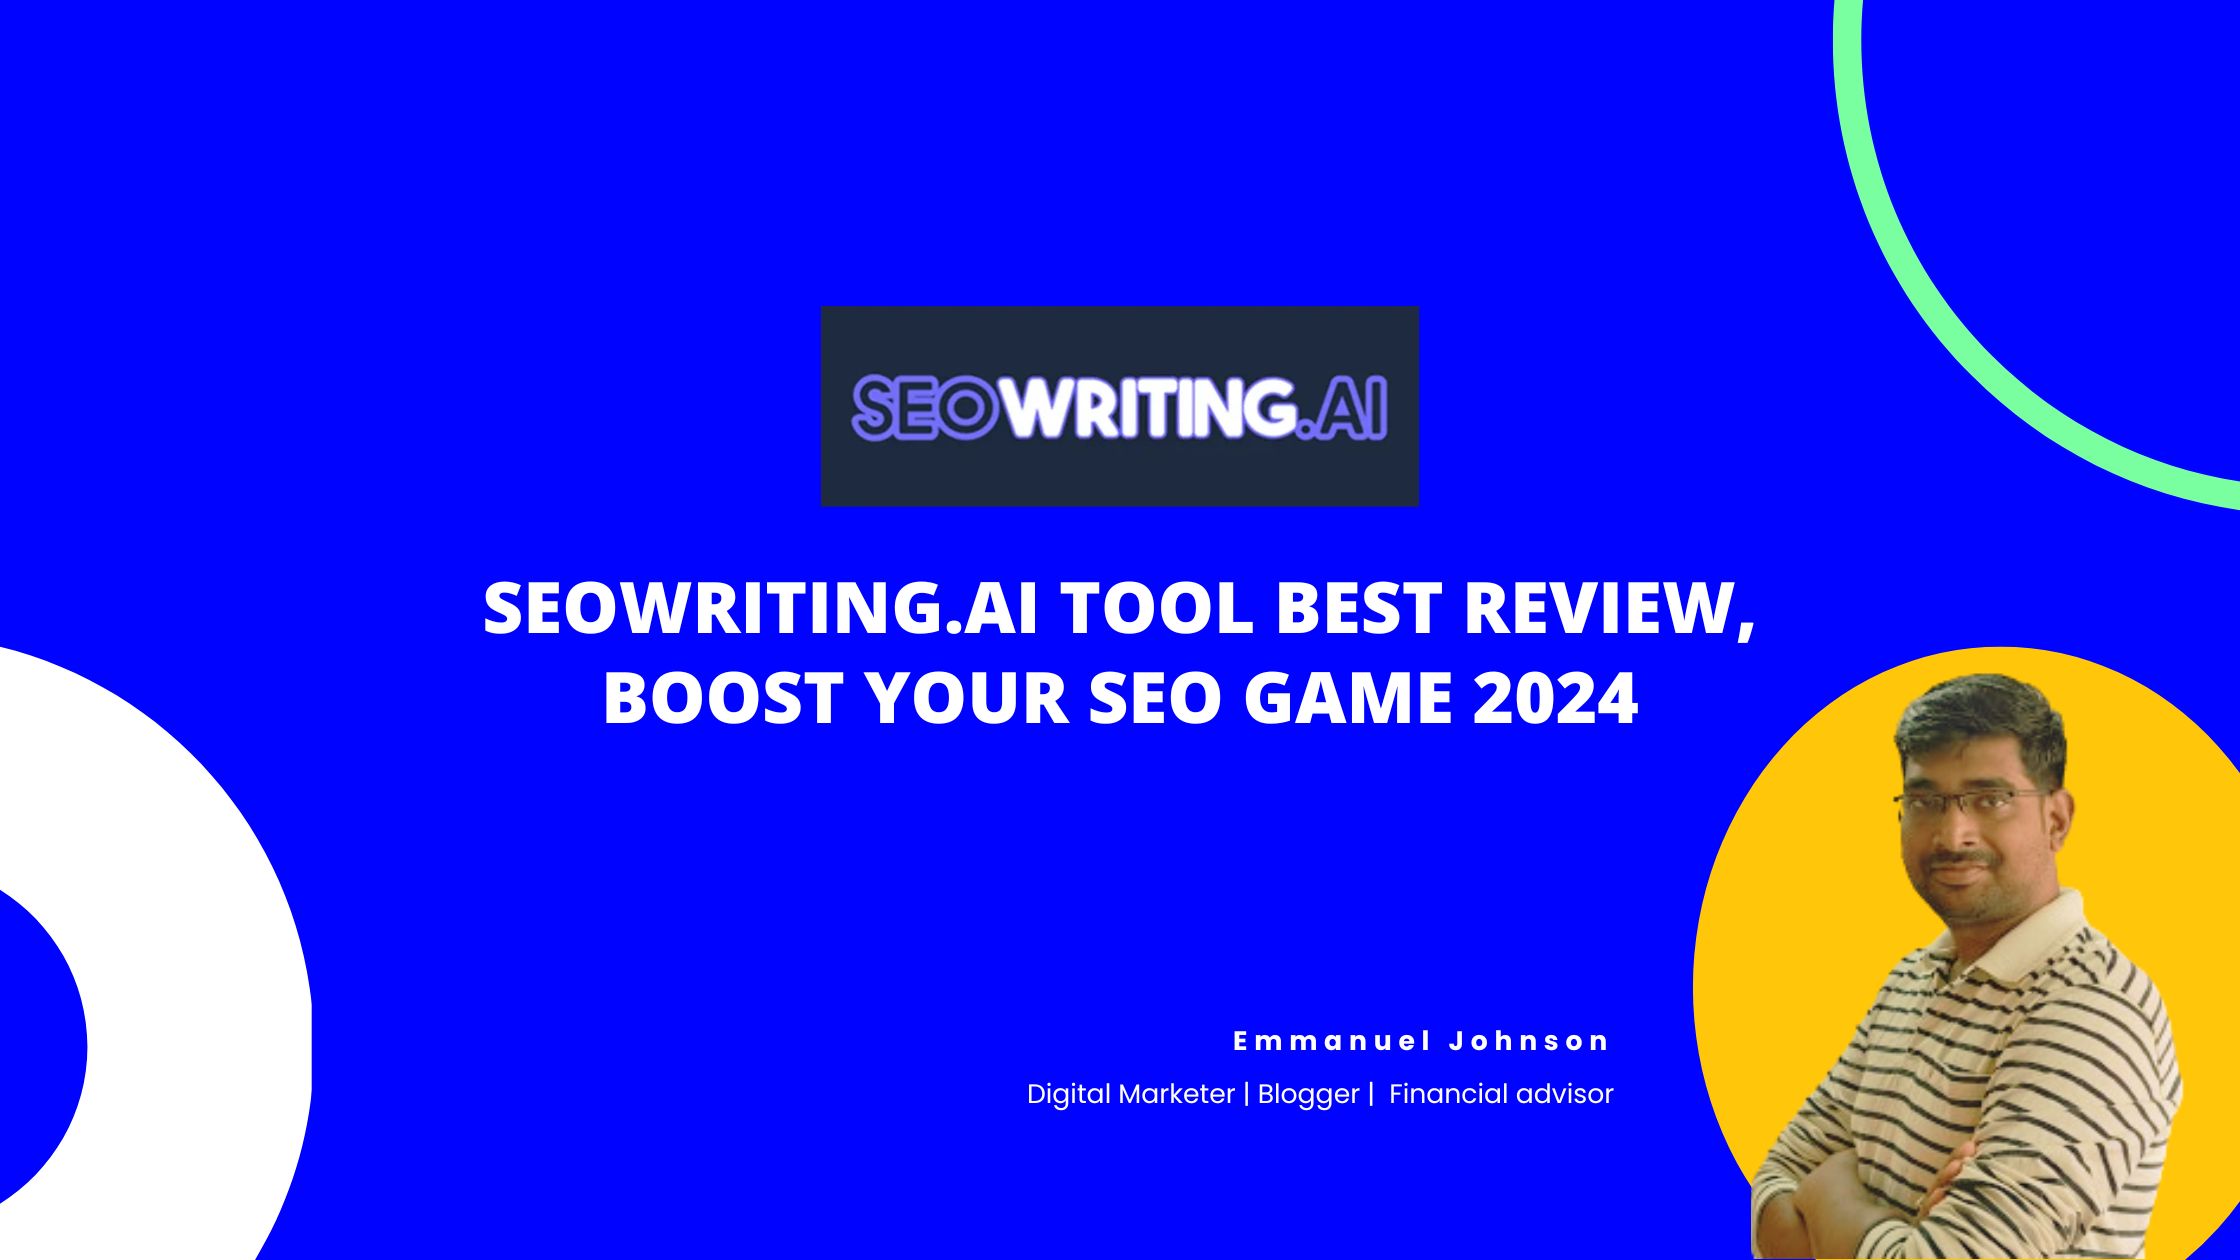 SEOwriting.ai Tool Best Review, Boost Your SEO Game 2024